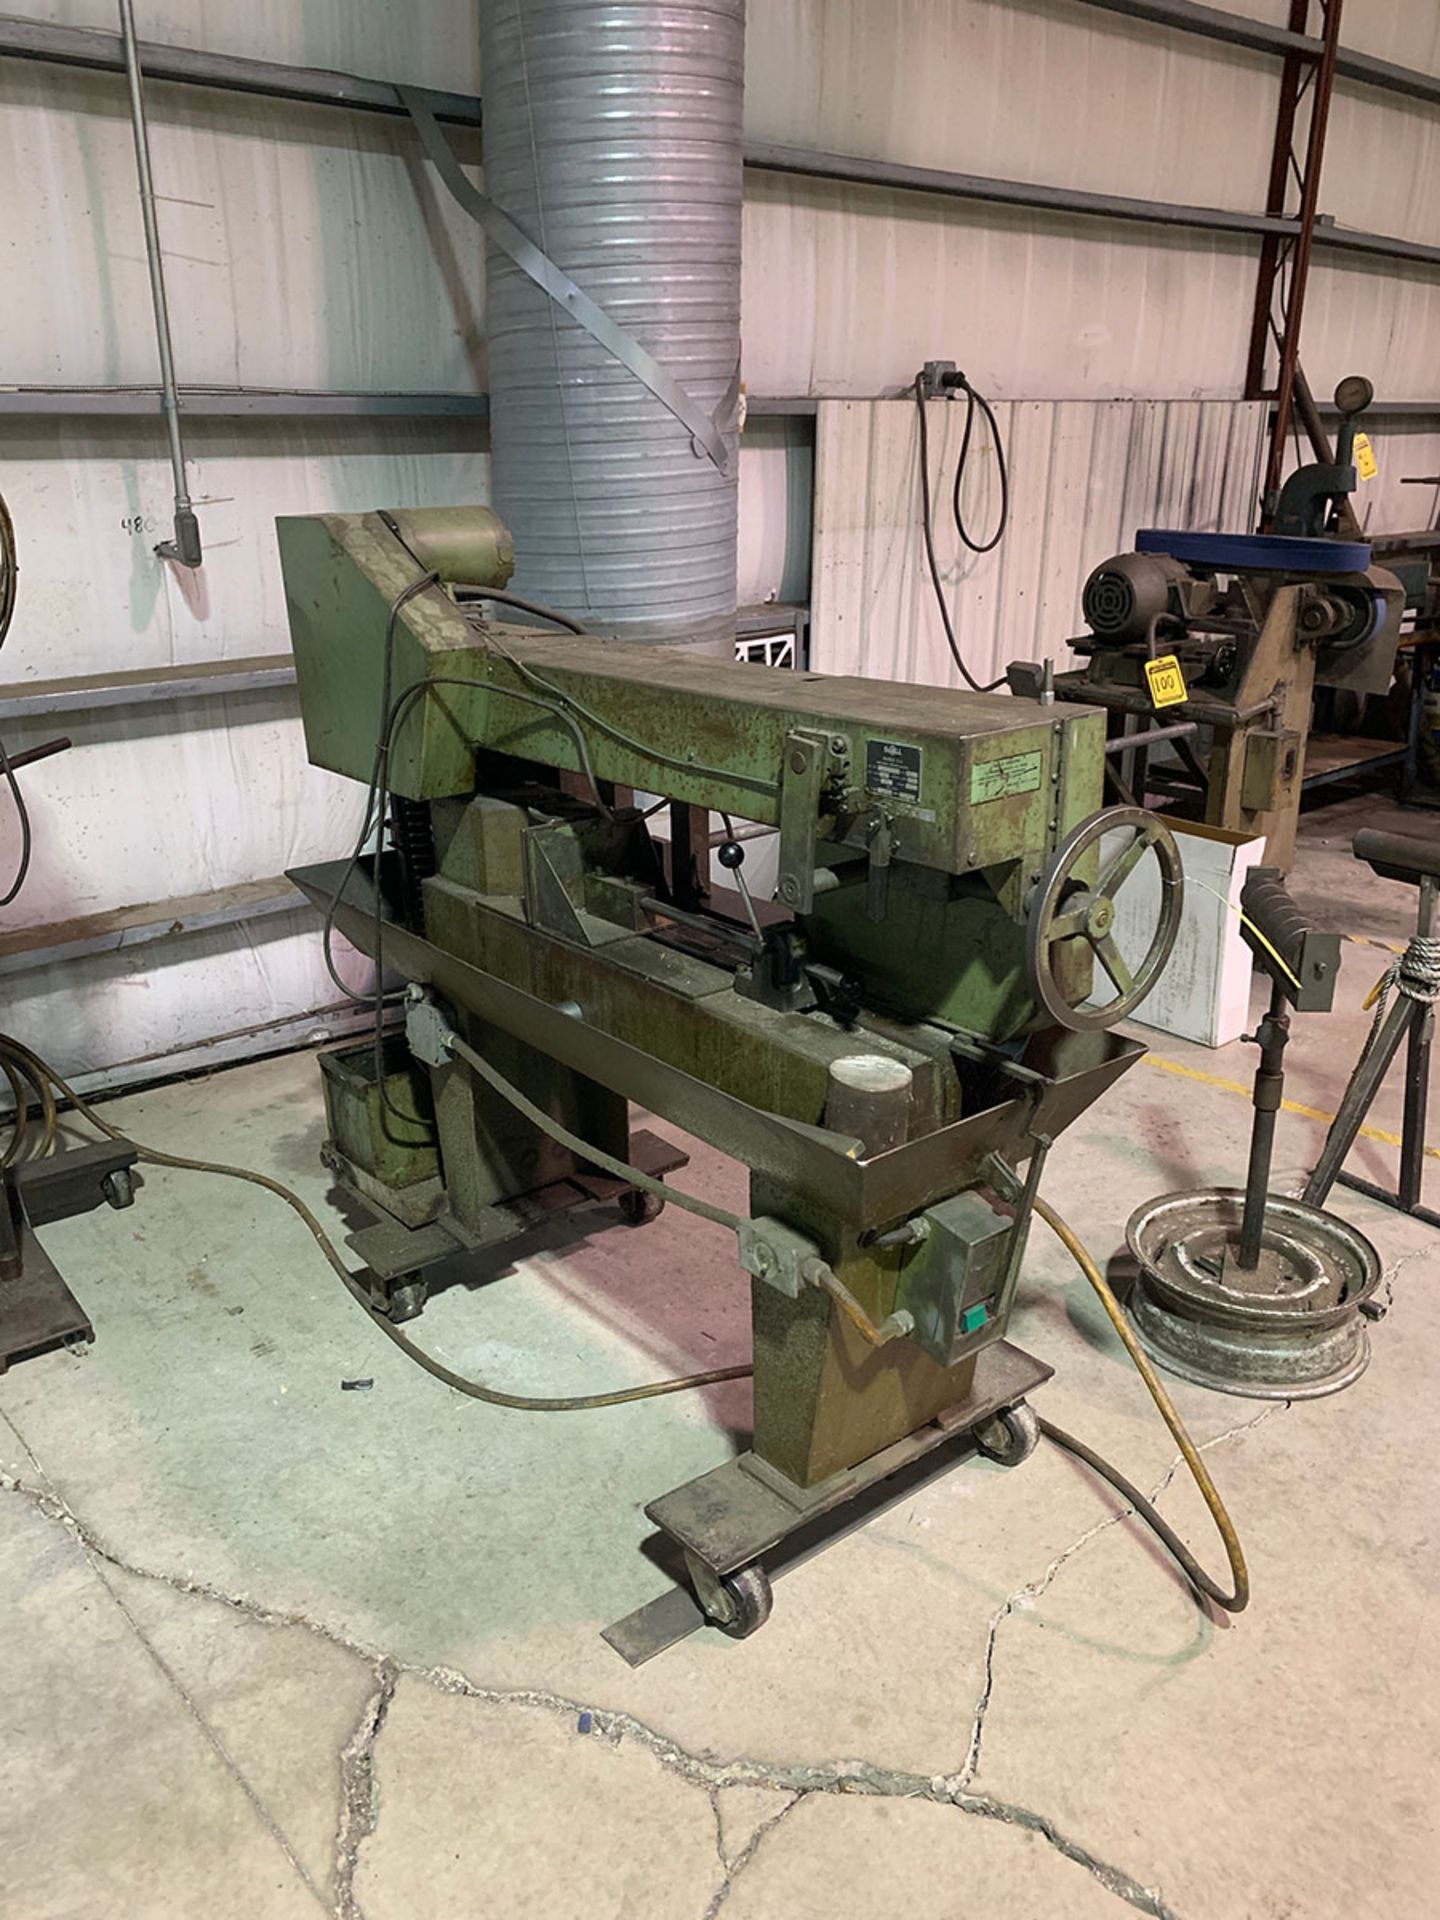 DOALL HORIZONTAL BAND SAW, MODEL C-4, S/N 234-712085, 3-PHASE, MANUAL 8'' MATERIAL CLAMP, BAND 3/4'' - Image 2 of 2